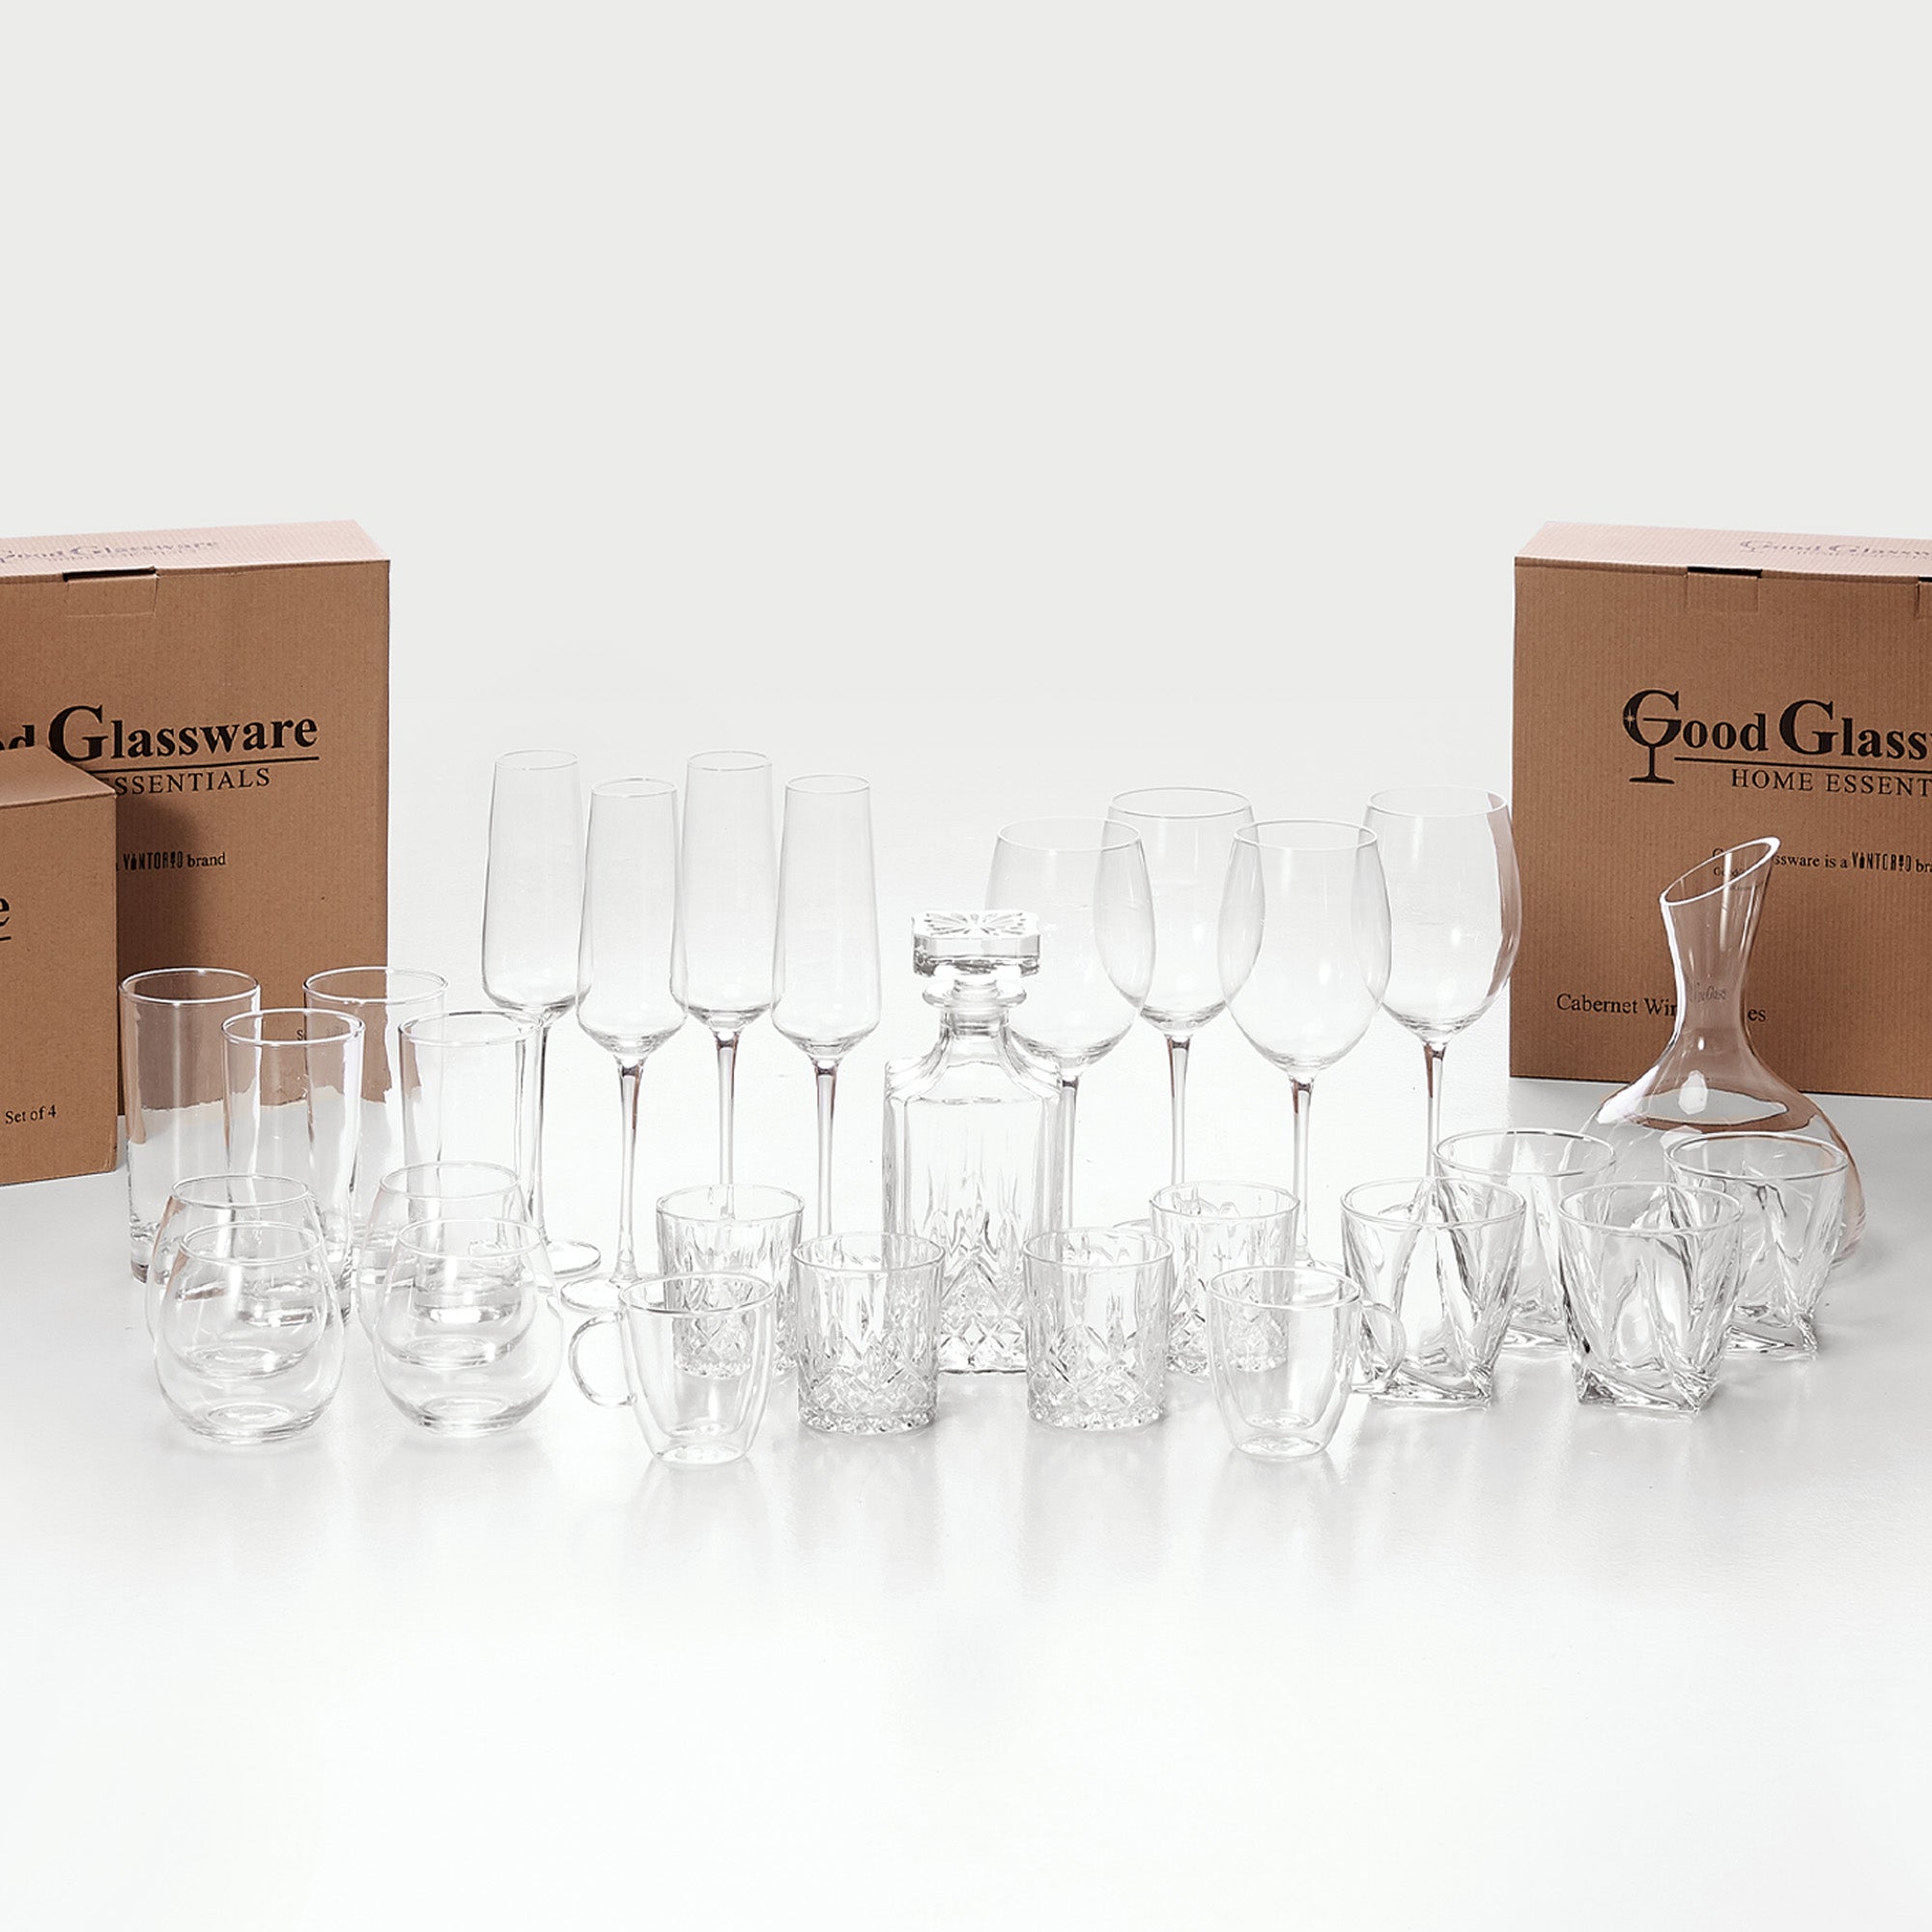 VIEW Lungo Glasses - Set of 2, Accessories